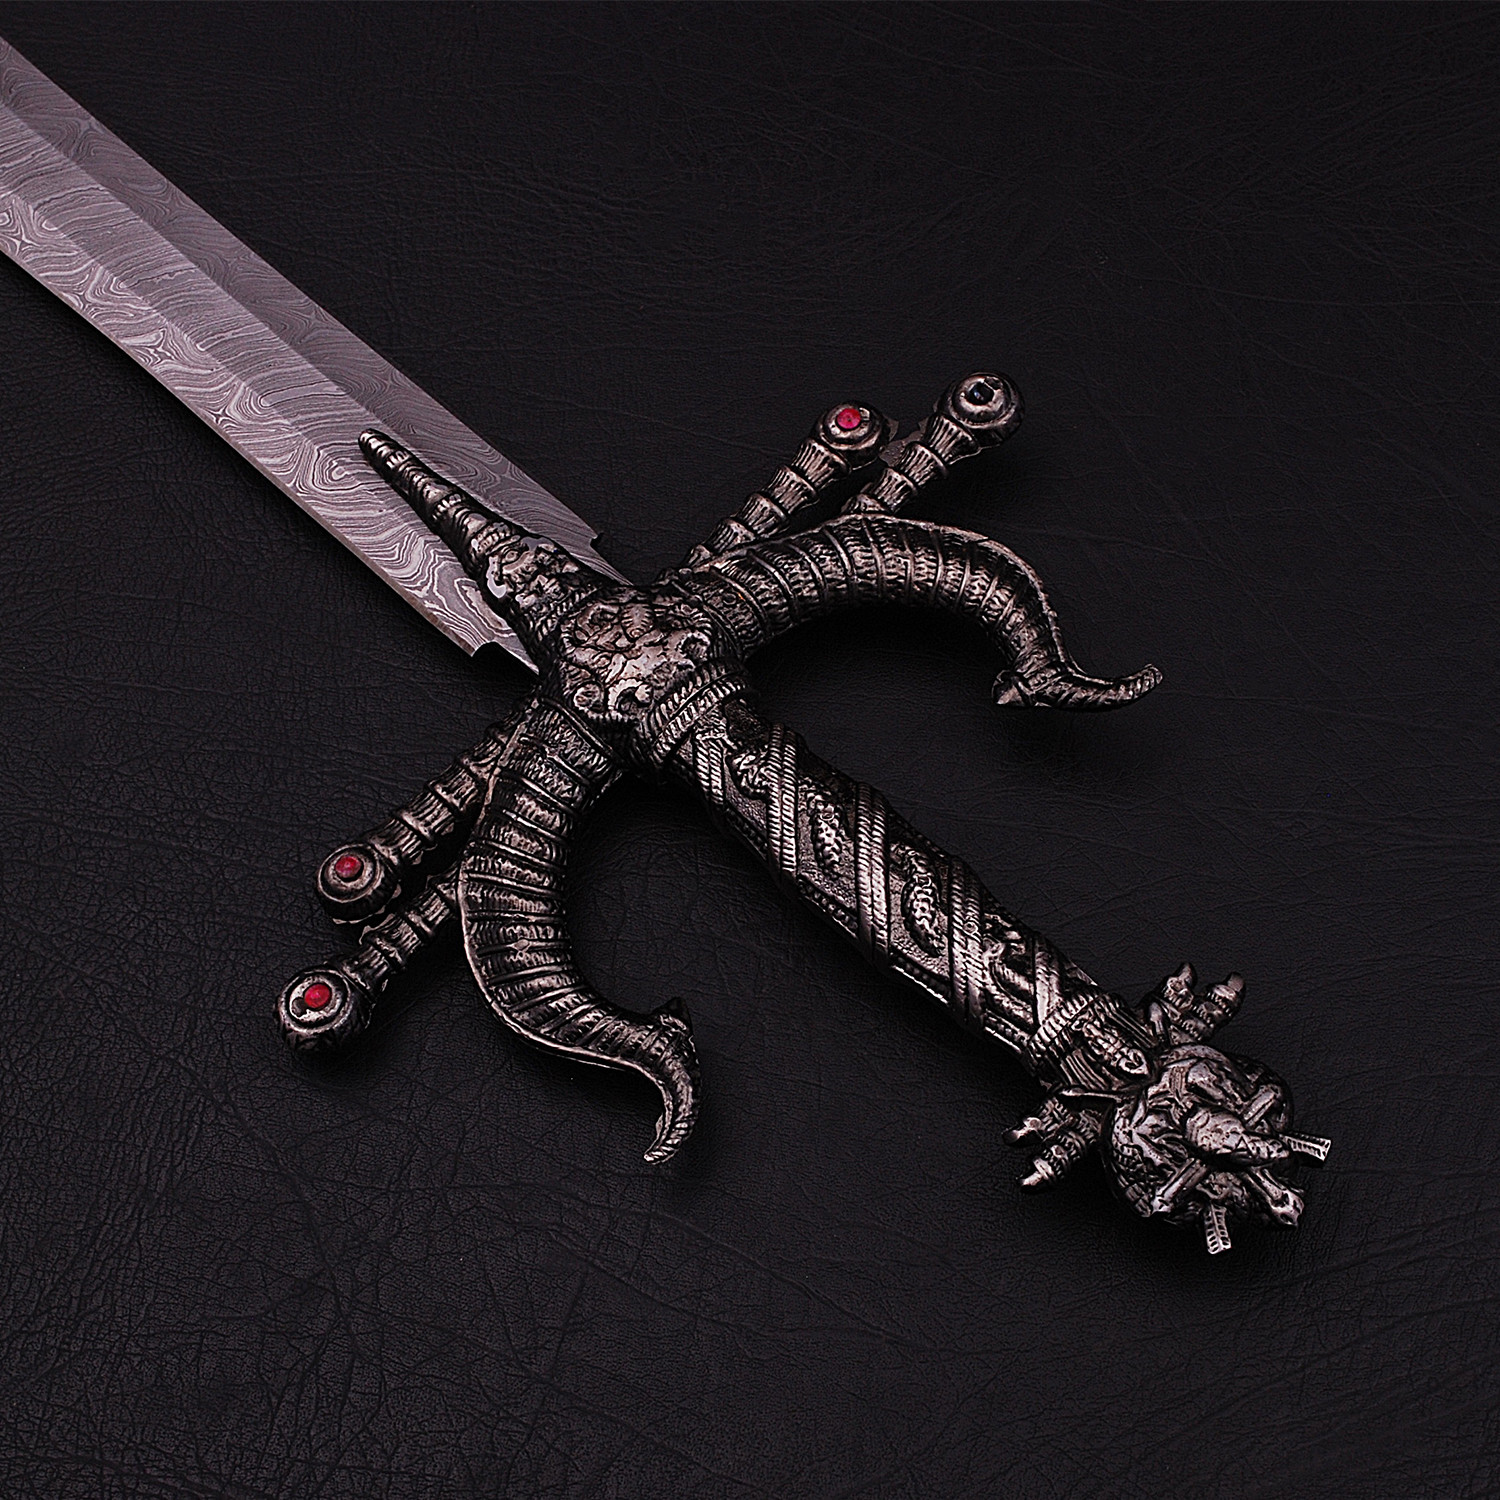 Damascus Odin Sword // 9269 - Black Forge Knives - Touch of Modern